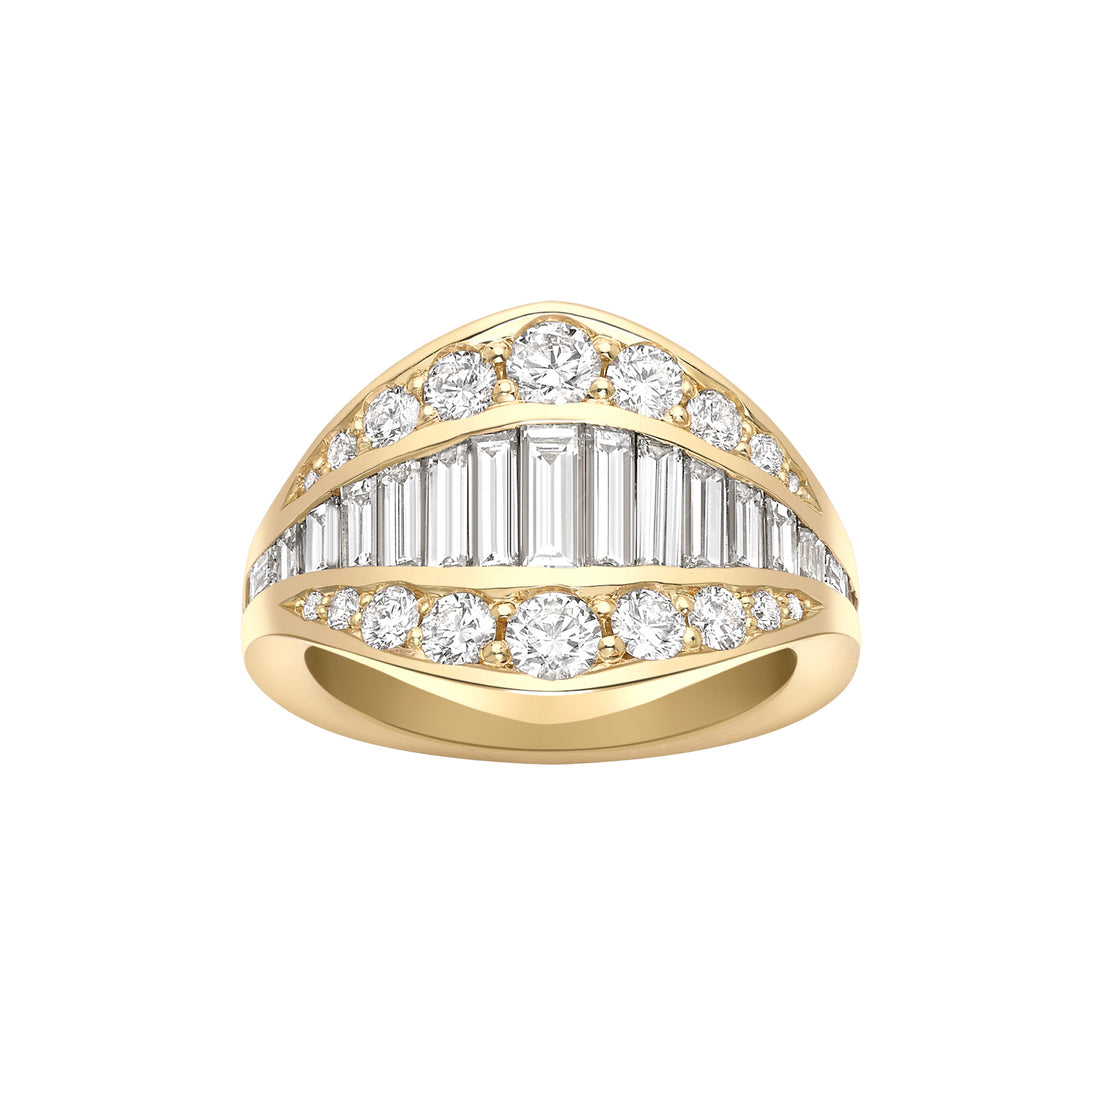  Baguette Diamond Wide Band Ring by Hattie Rickards | The Cut London